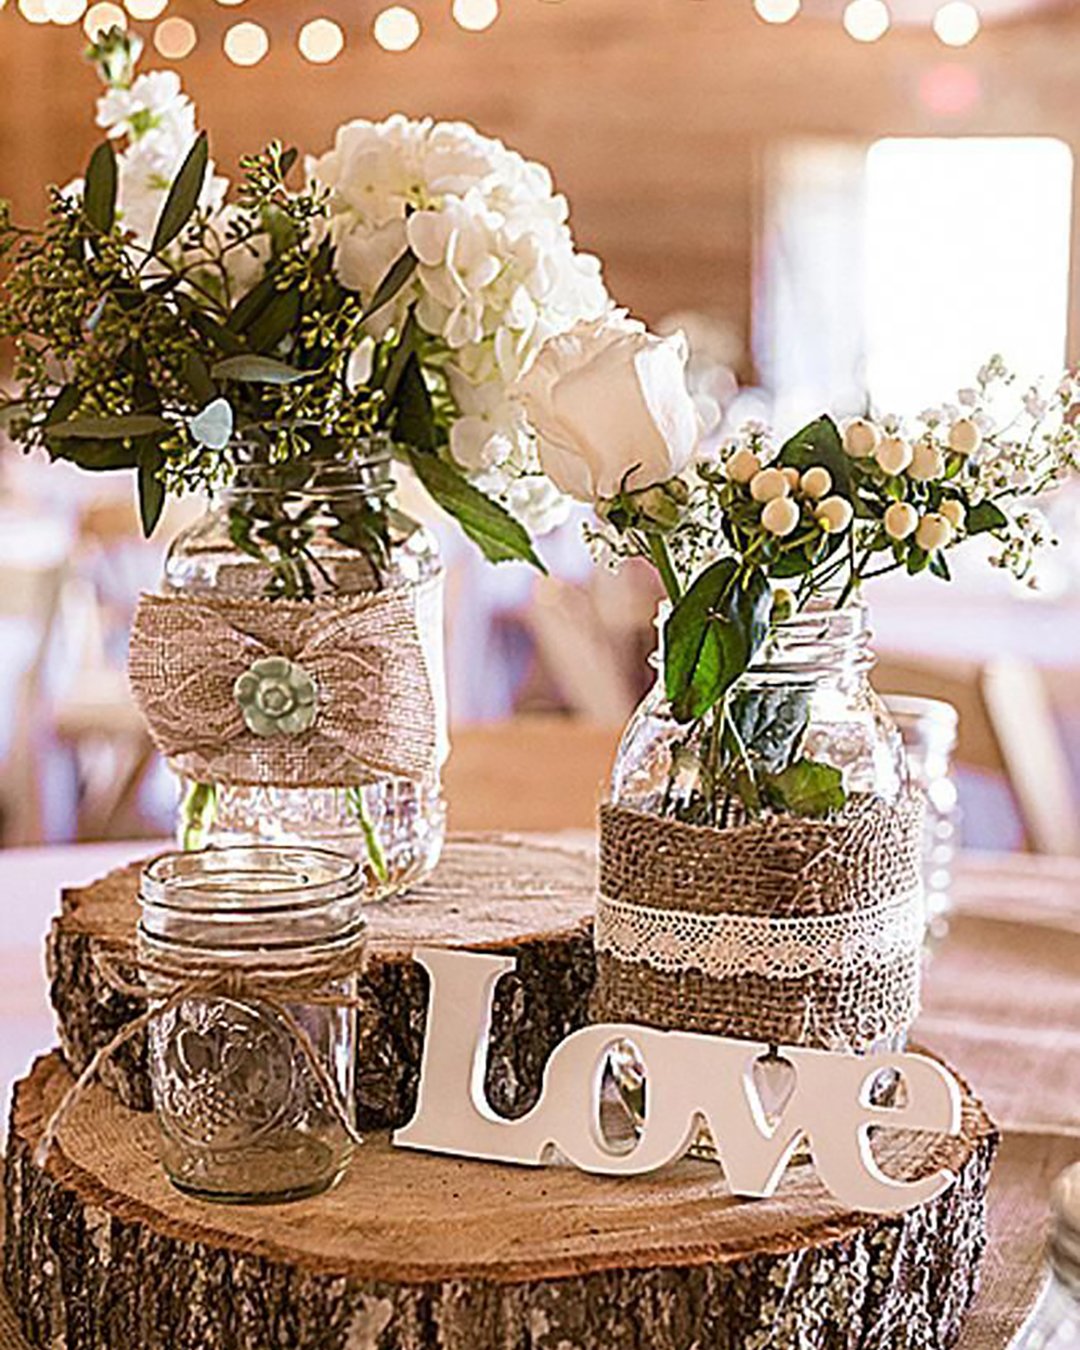 must have wedding photos in wedding album centerpieces in rustic style brandy angel photography 2